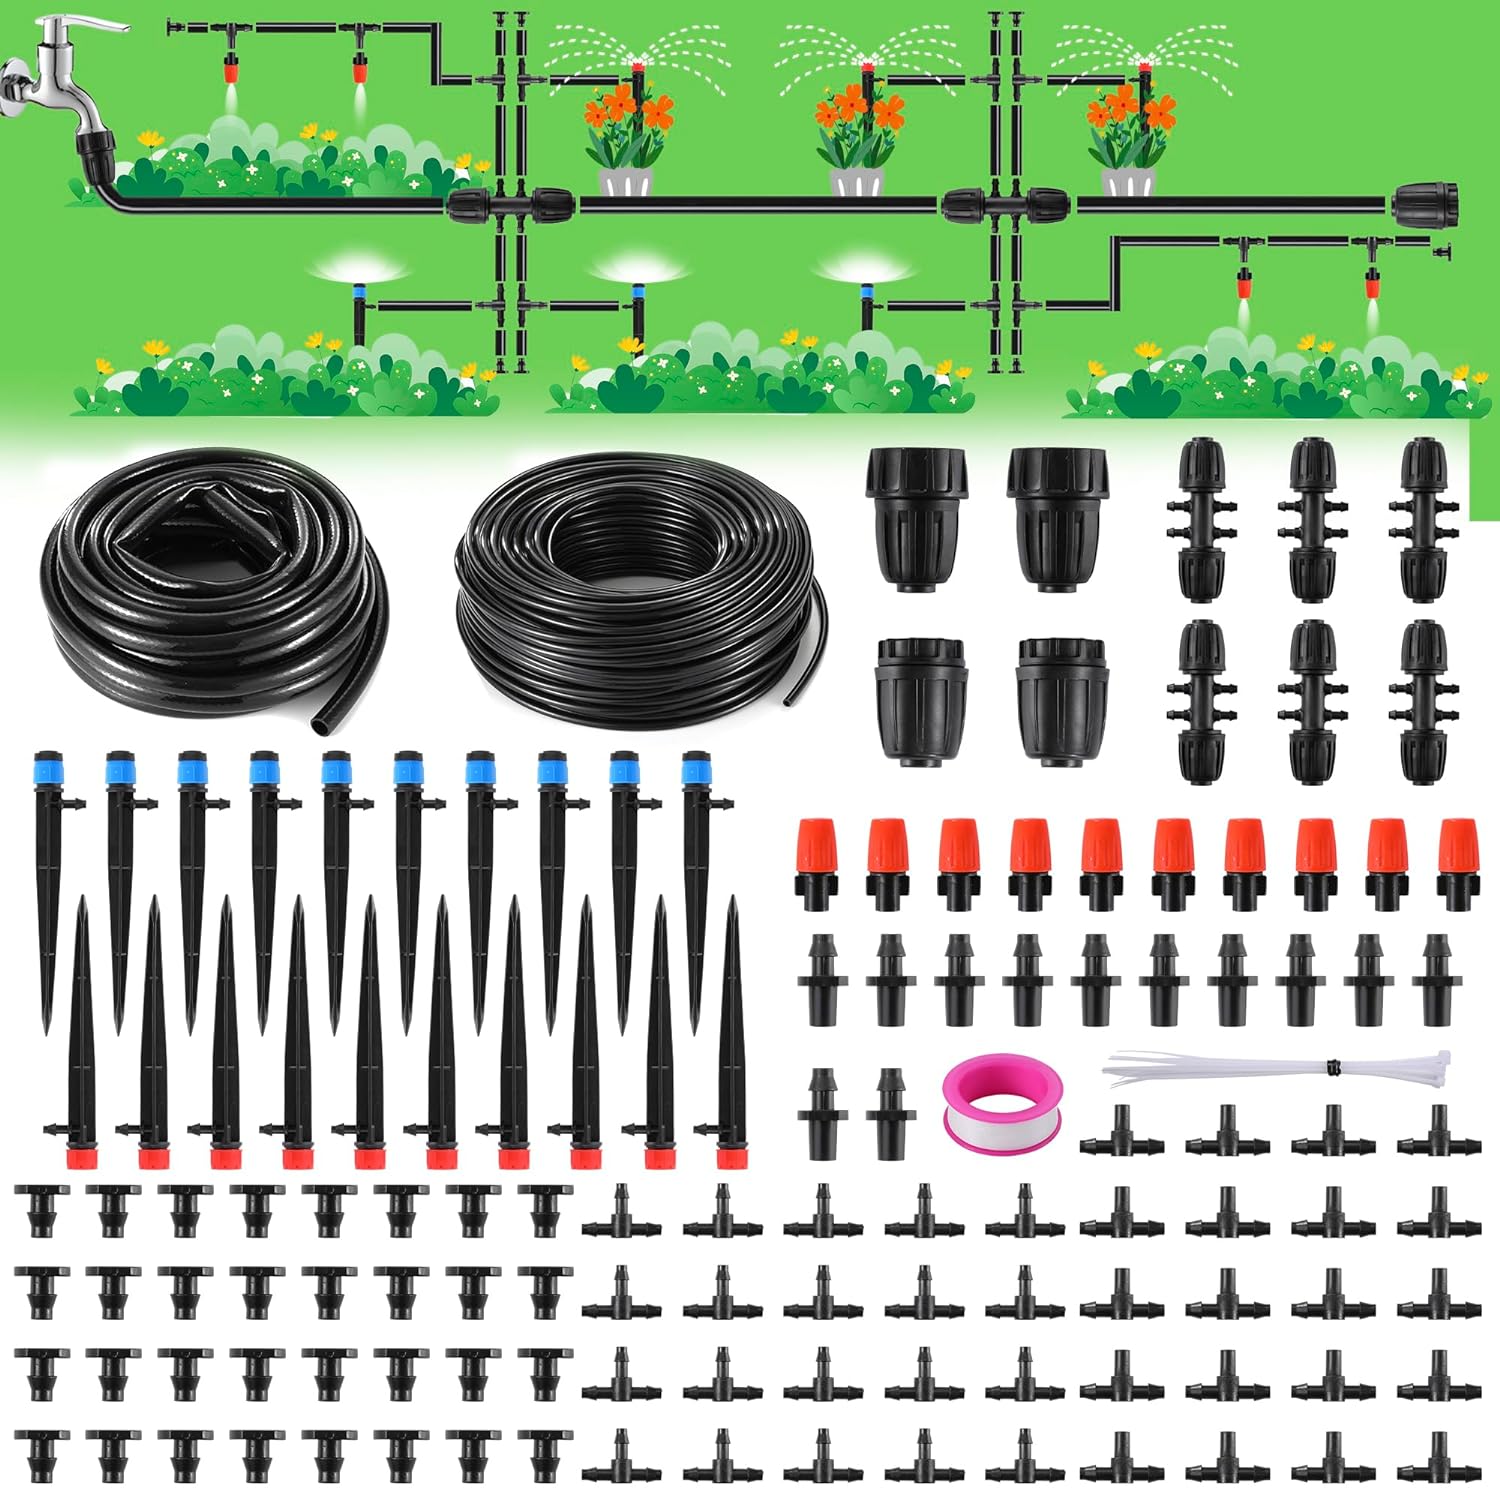 240FT Drip Irrigation Kit, Plant Watering System, Automatic Irrigation System with 40FT (1/2) Hose and 200FT (1/4) Distribution Tubing for Garden, Greenhouse Flower, Flower Bed Patio, Lawn Watering